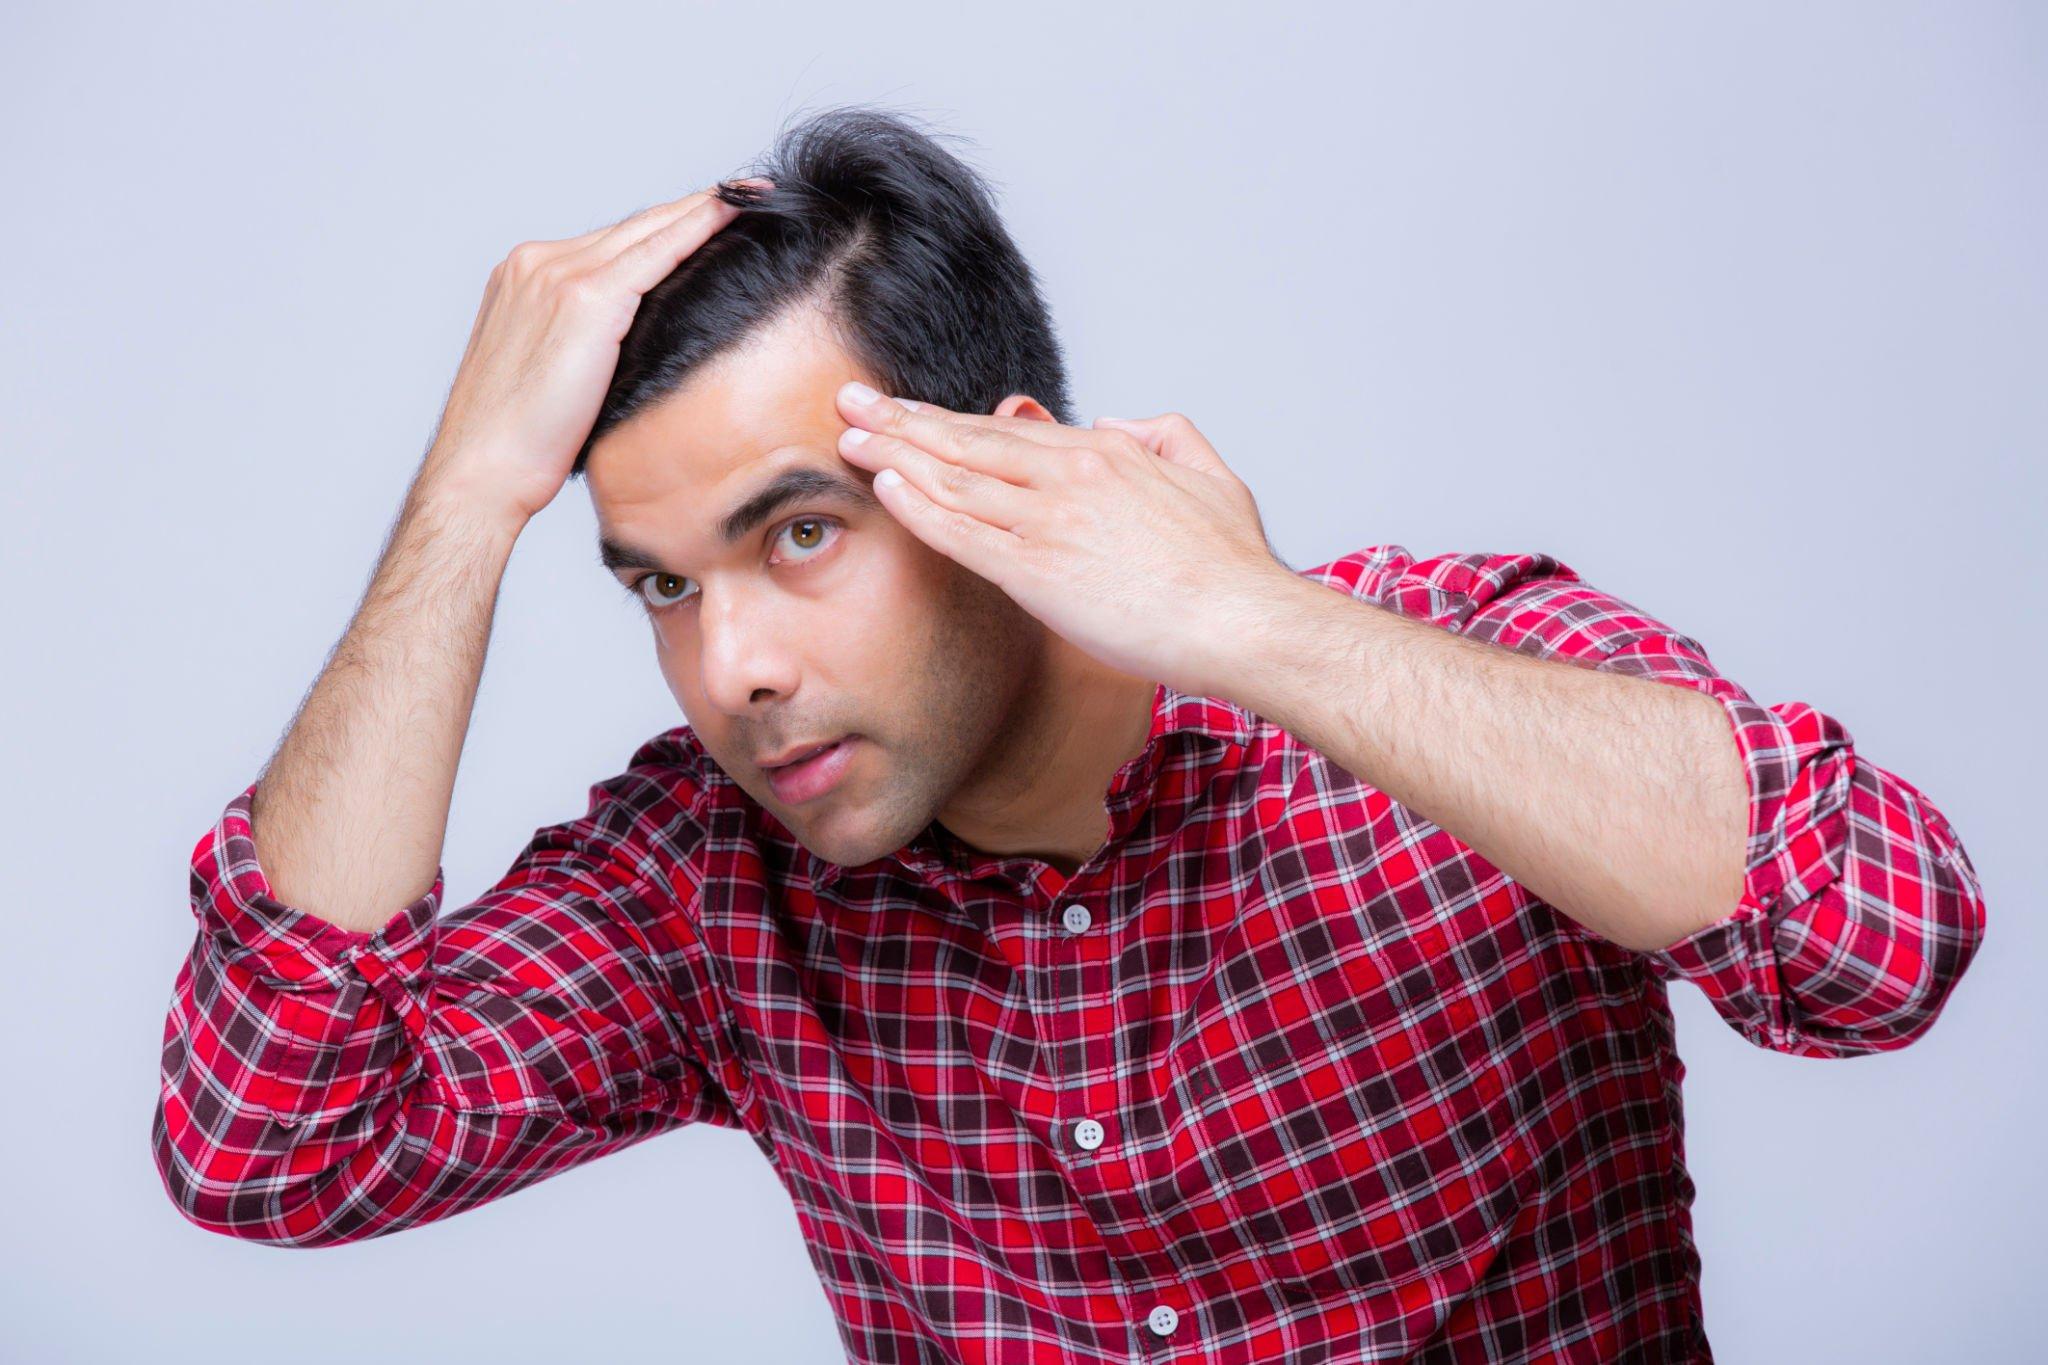 How to prevent and control hair fall? Here are some tips to prevent and control hair fall: